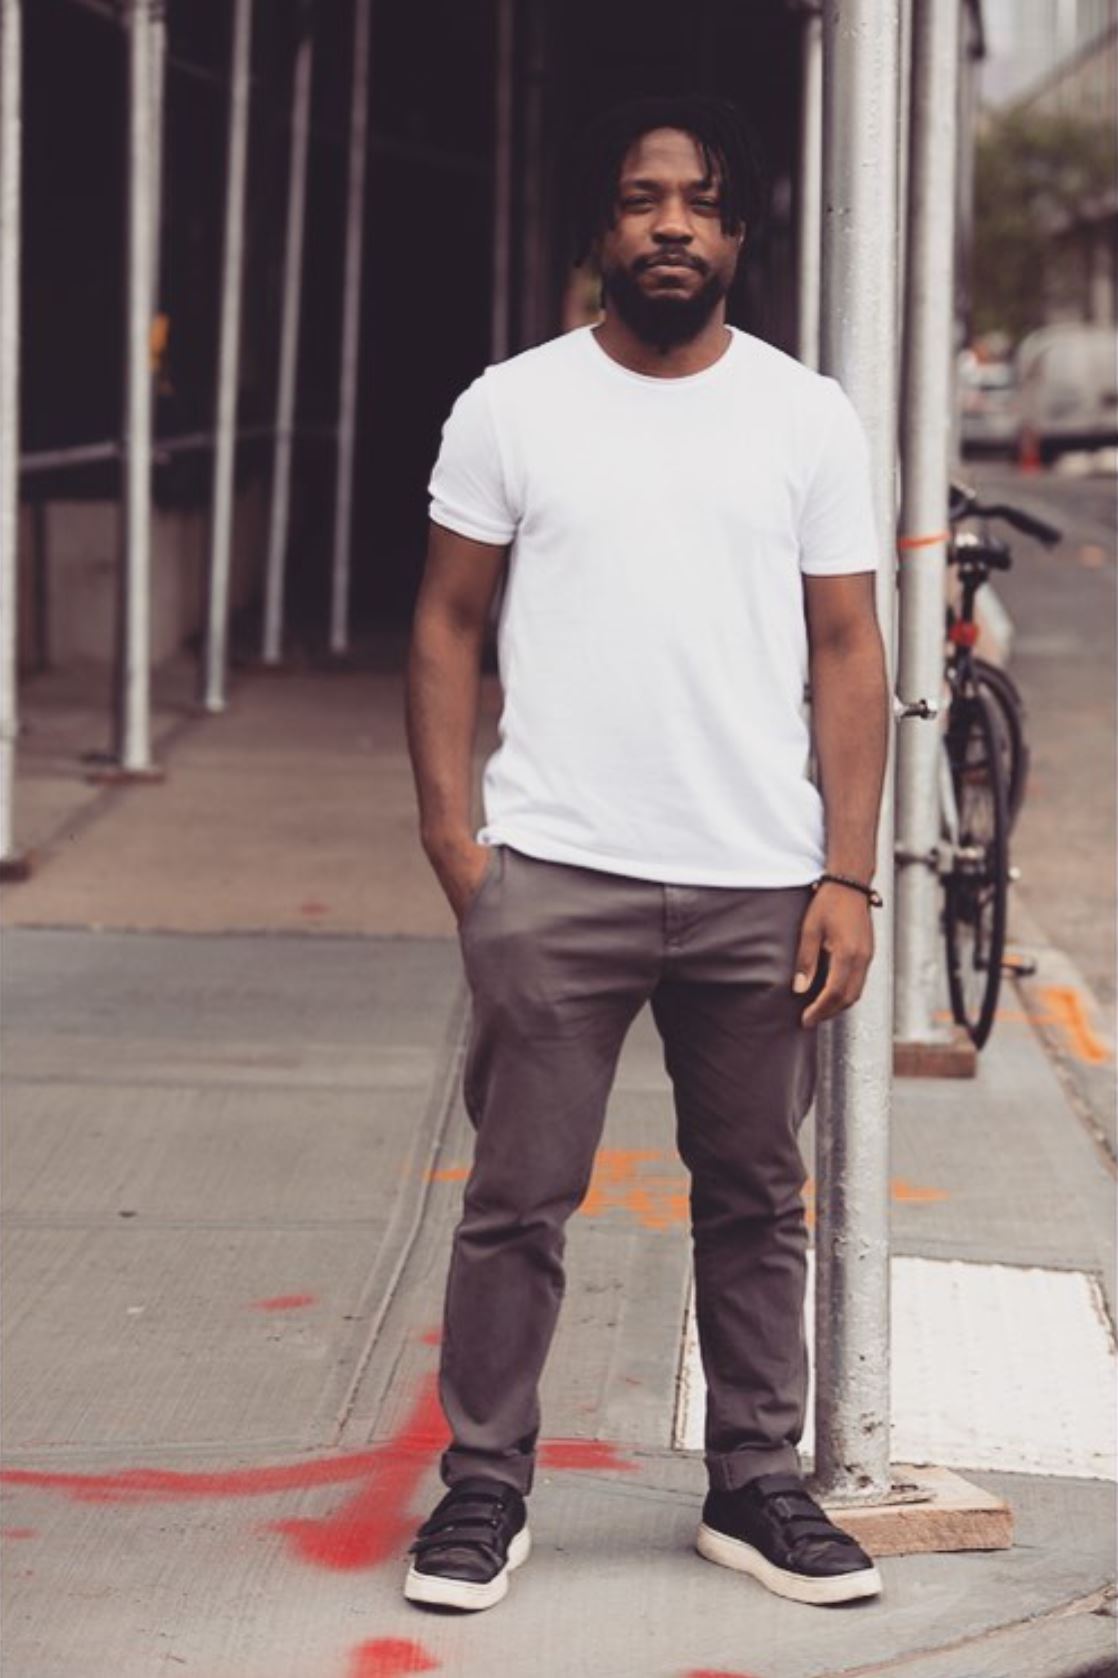 A Black man stands on the sidewalk of a city street. There is scaffolding poles behind him. He wears a white t-shirt and dark pants. He is looking at the camera, unsmilng, with a hand in his pocket. He is young with a short beard and short braided hair.